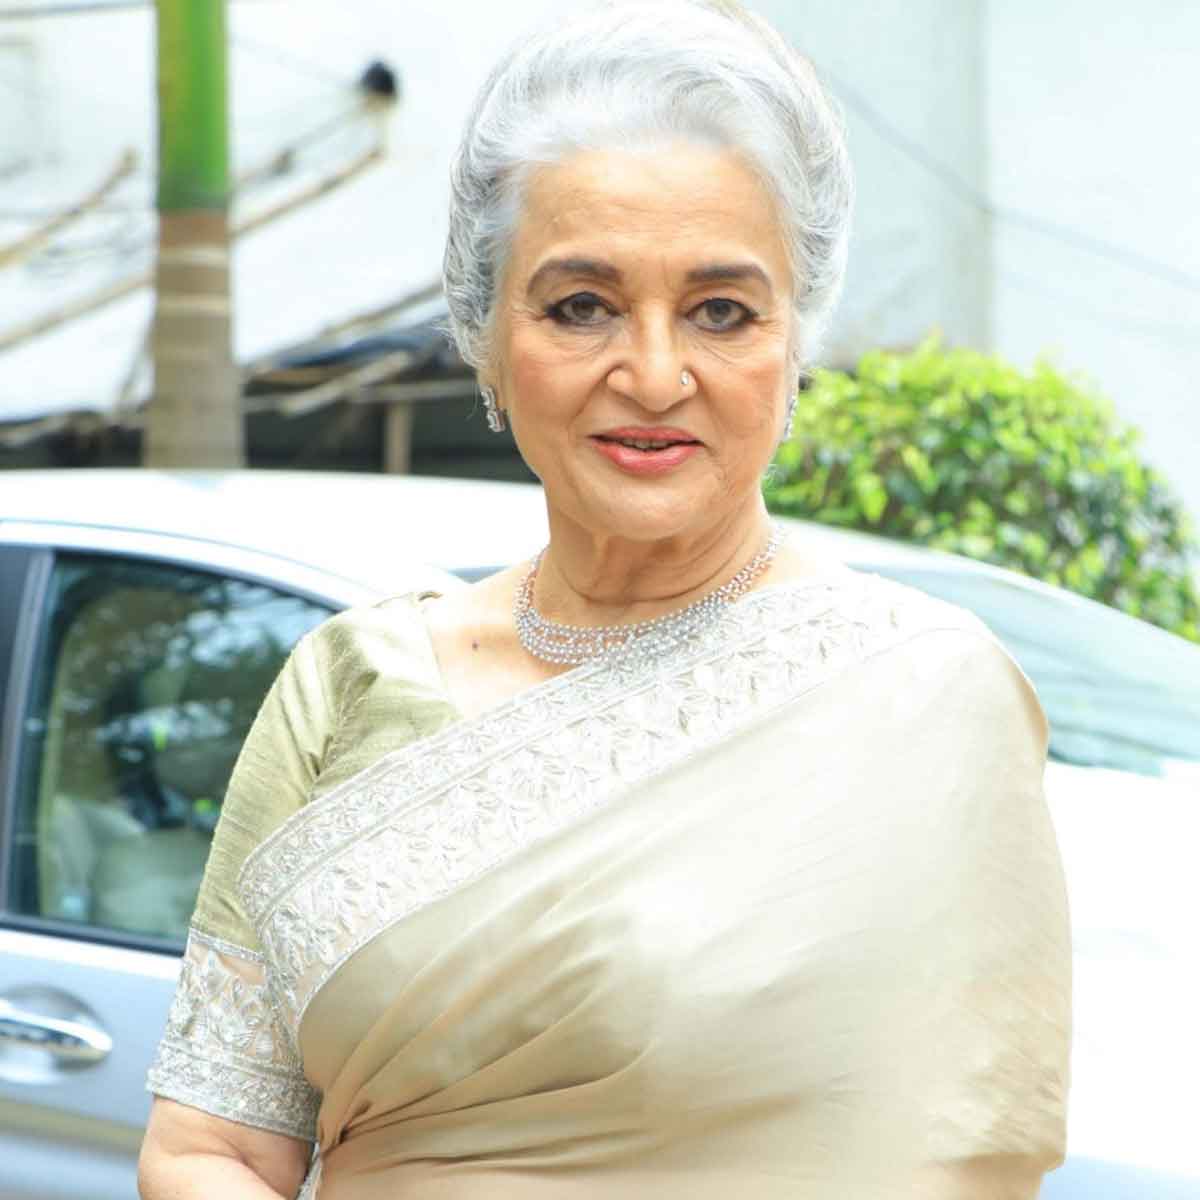 Exclusive: I do miss a soulmate sometimes, opens up Asha Parekh 